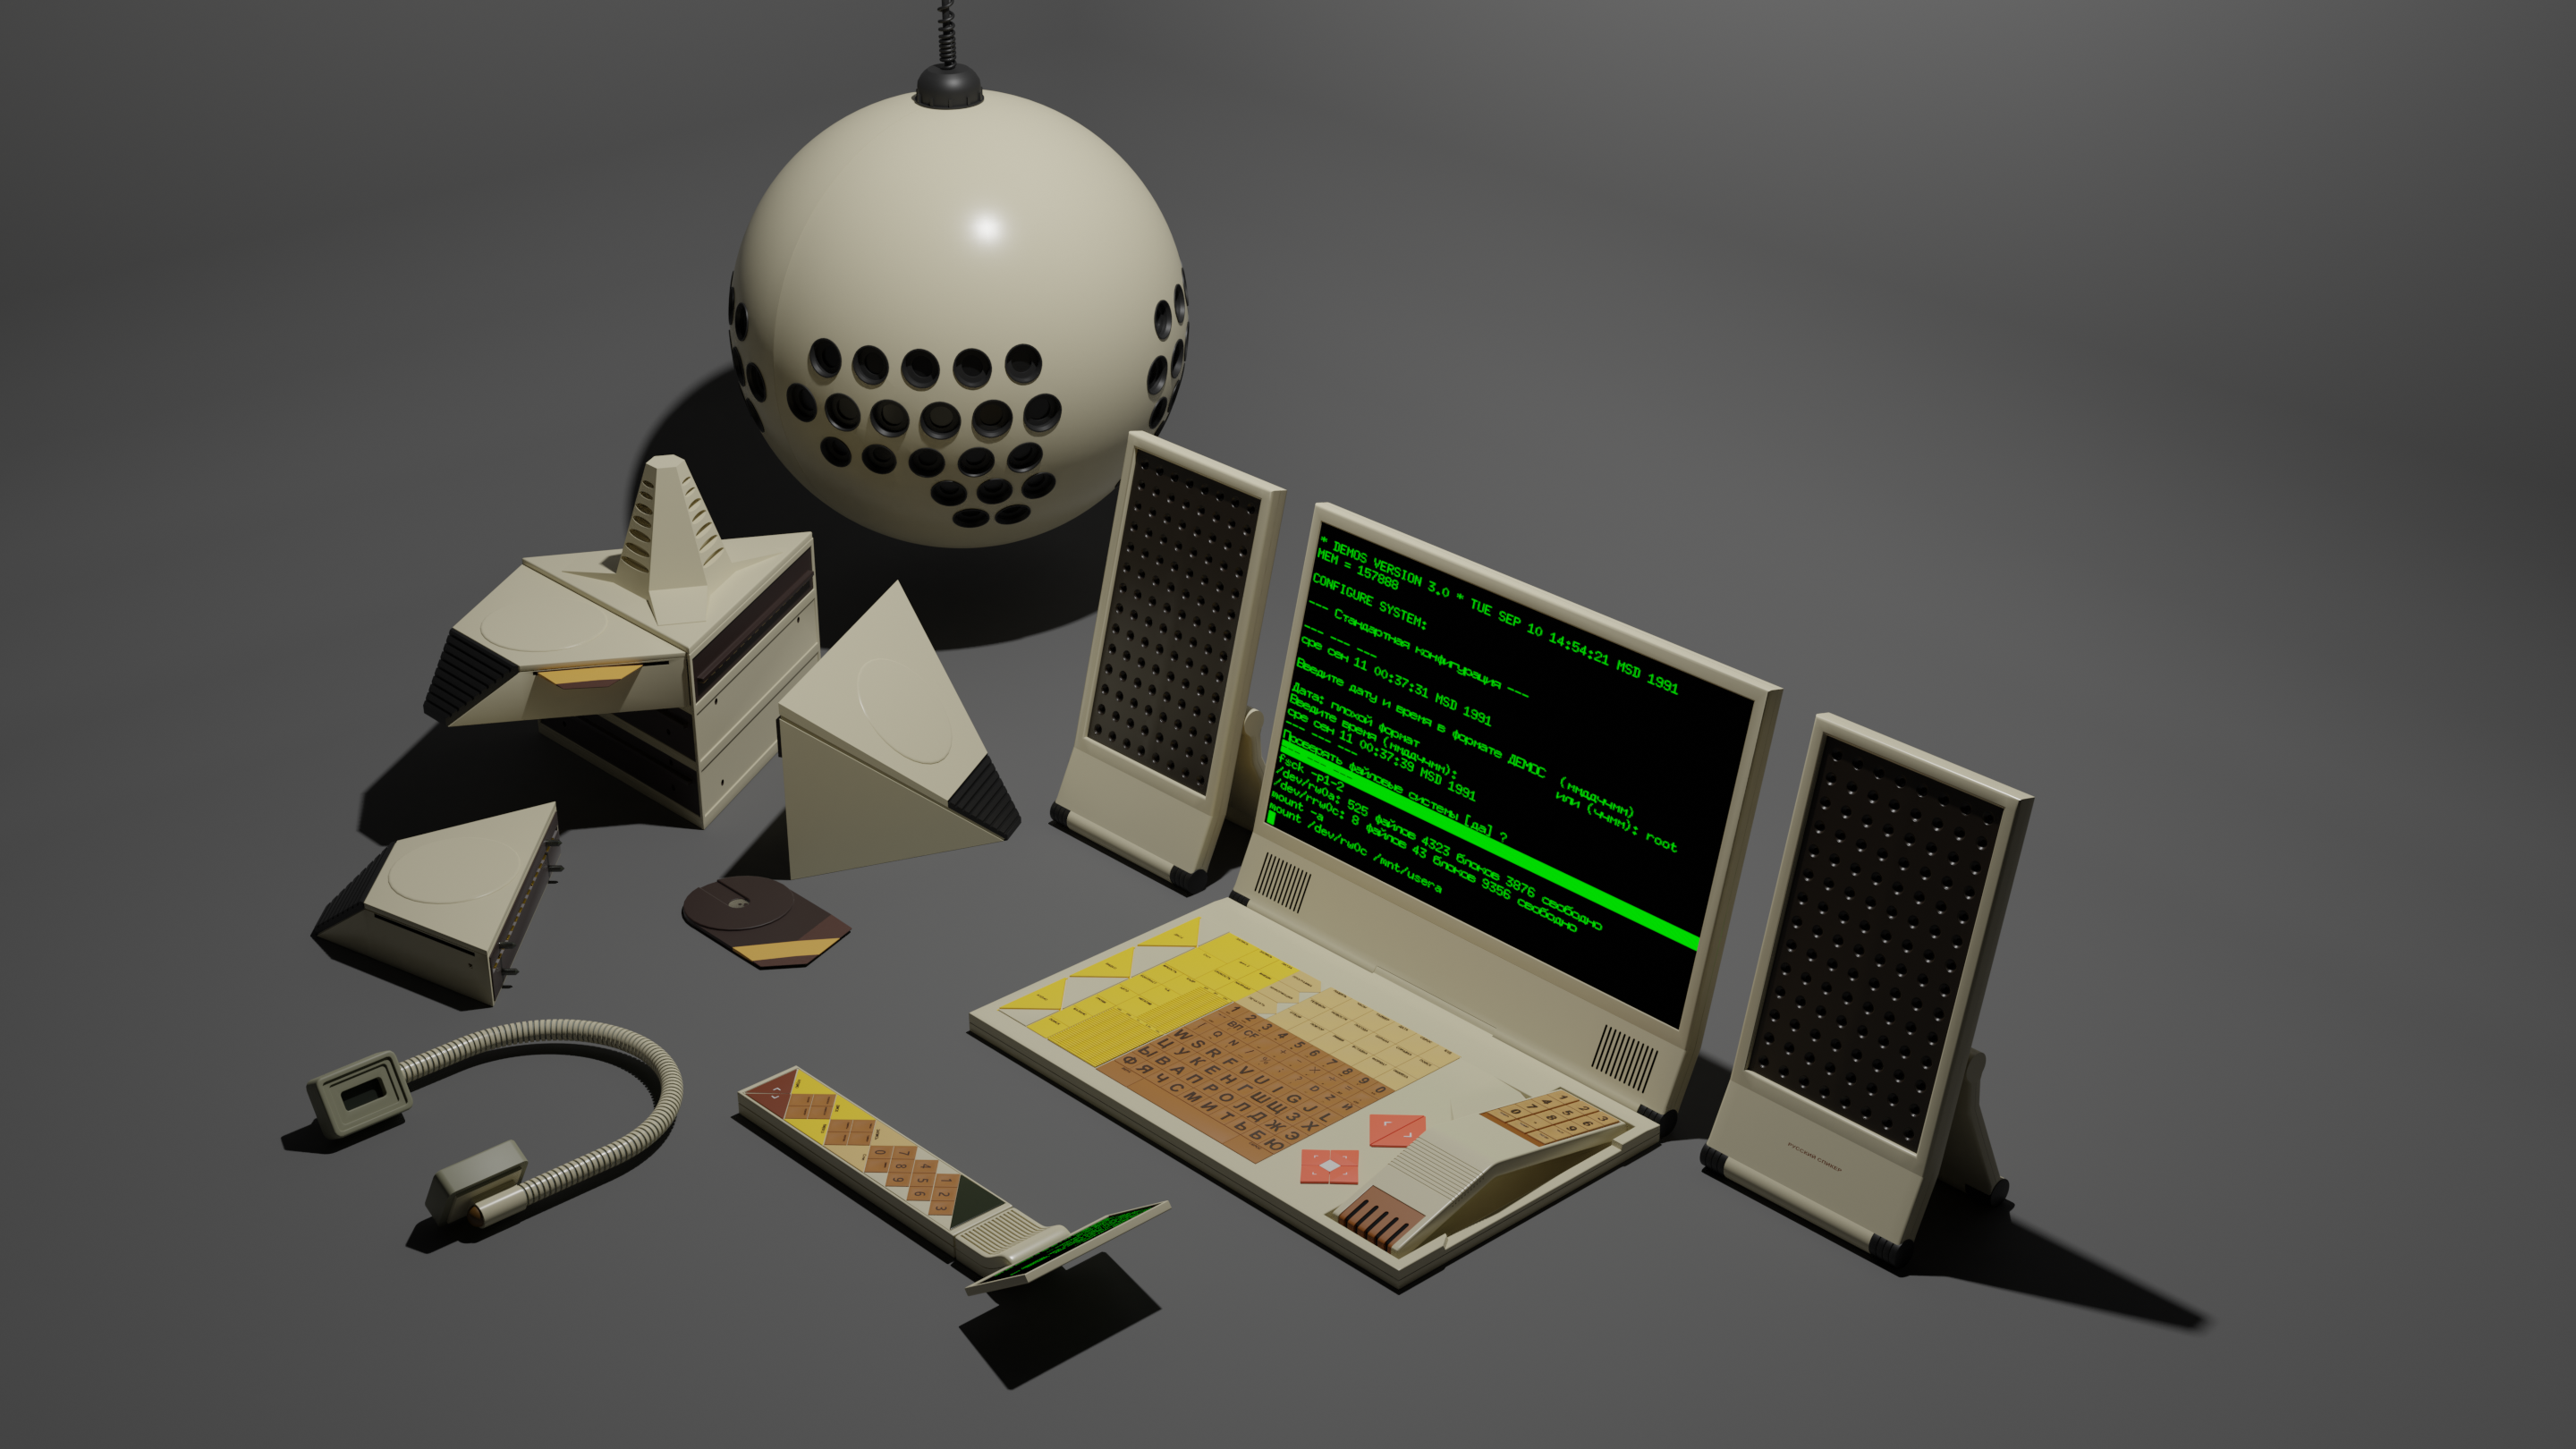 Project Sphinx (СФИНКС) Computer System preview image 1